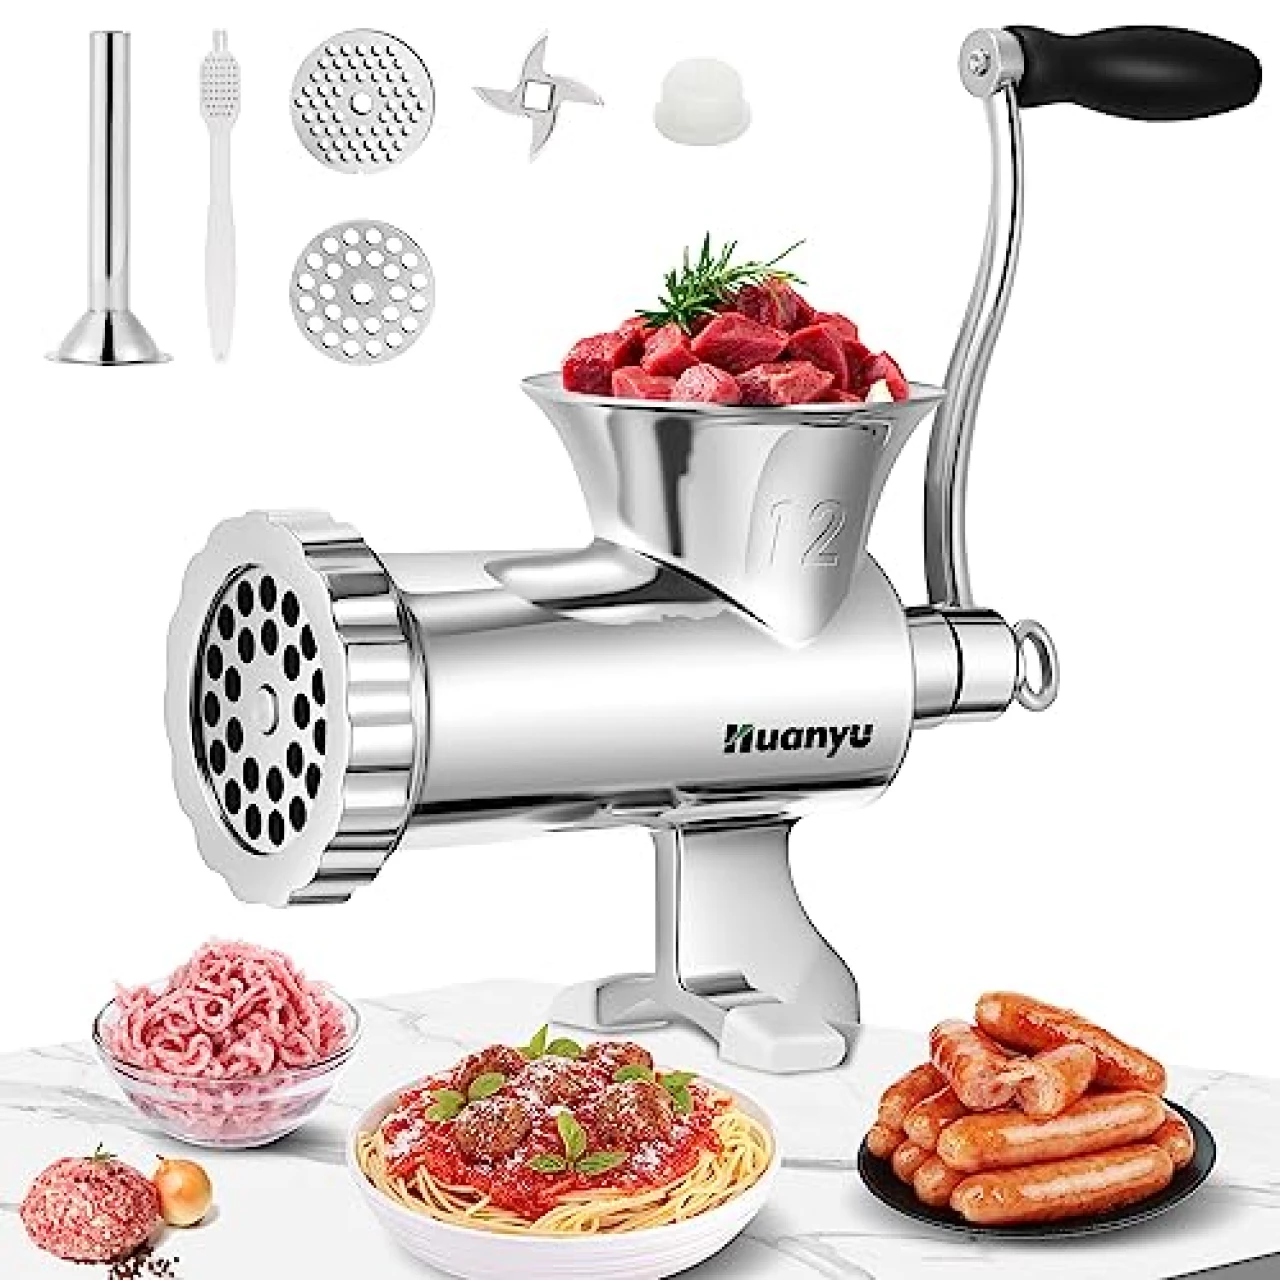 Huanyu Meat Grinder Manual Stainless Steel Meat Mincer Sausage Stuffer Filler Handheld Meat Ginding Machine Multifunctional Attachments Household for Chicken,Beef,Small Bone,Chili NO12